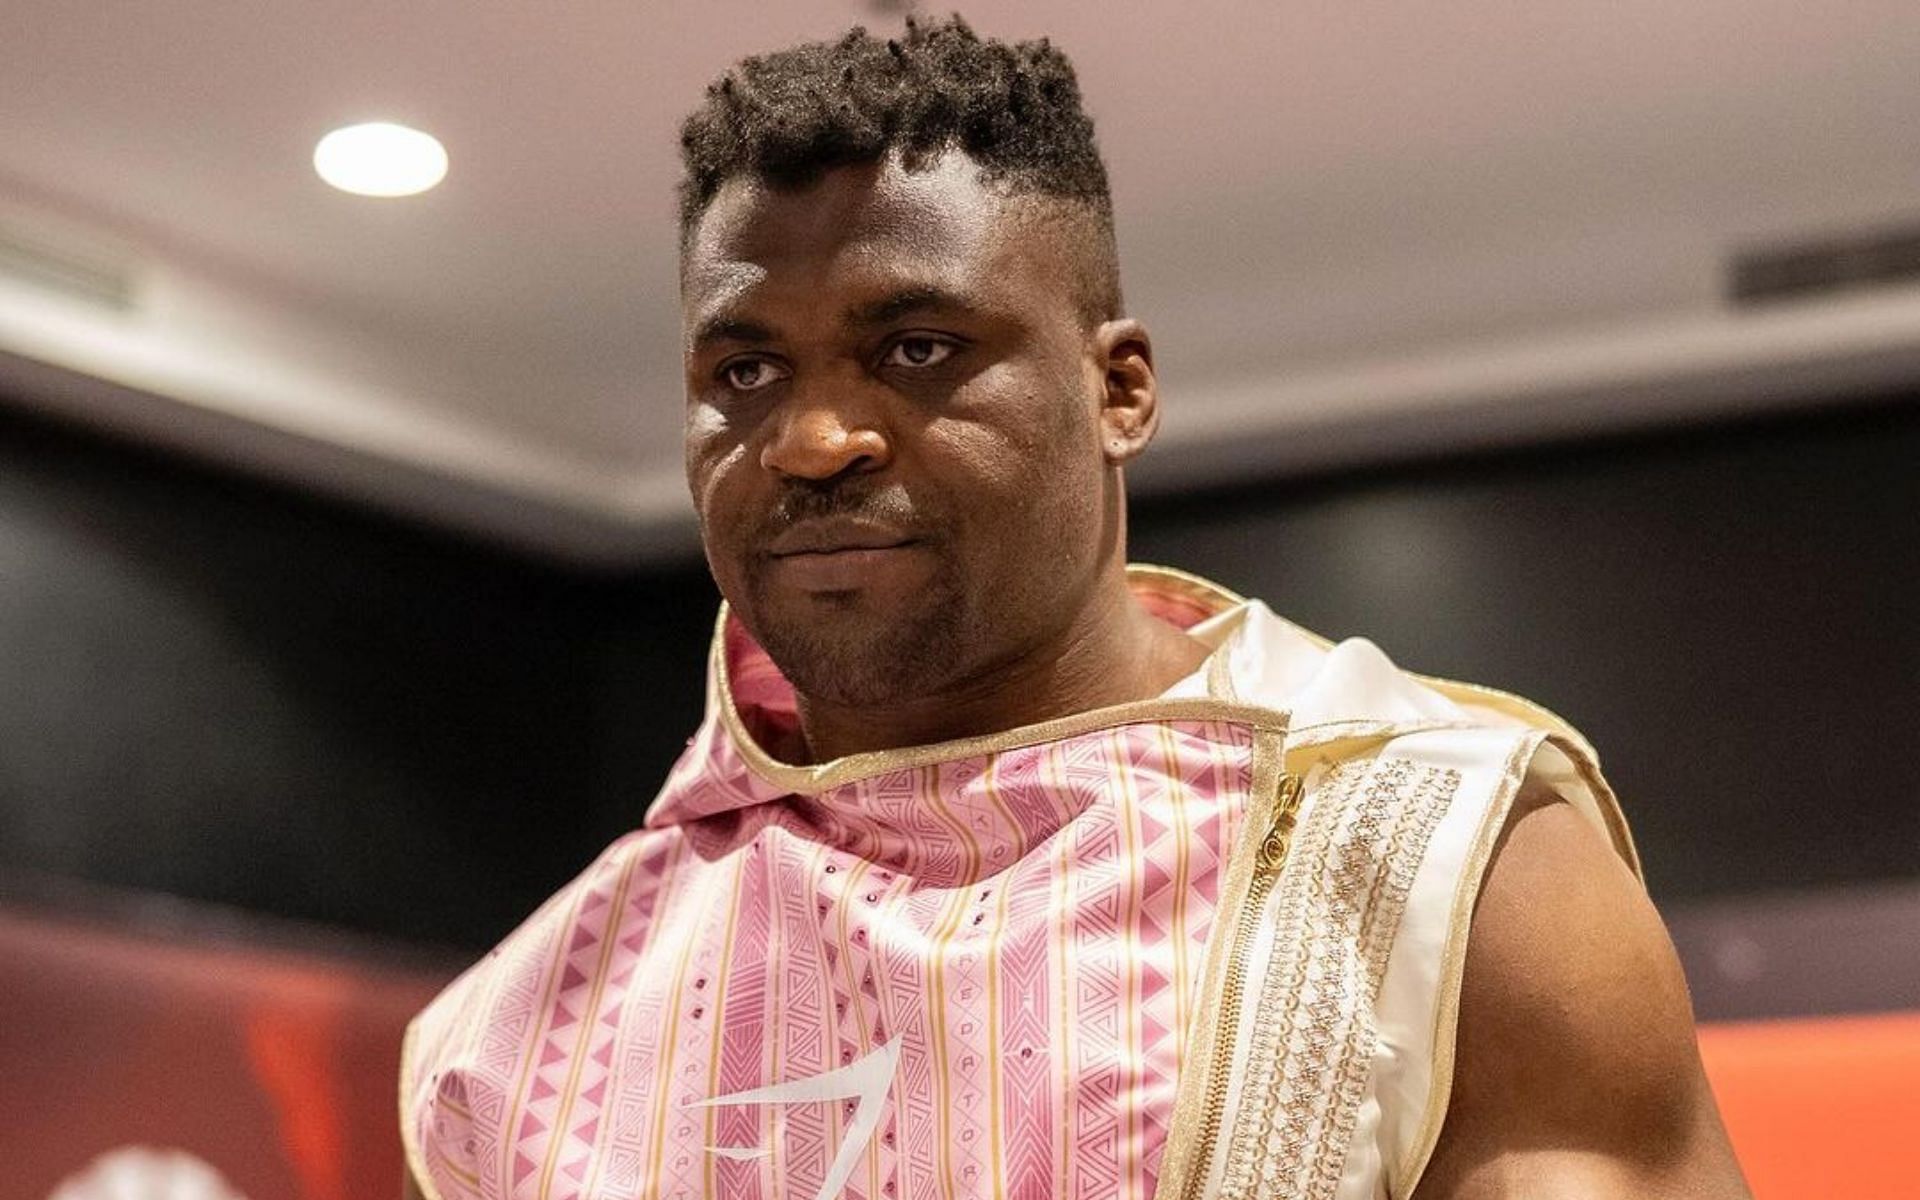 Francis Ngannou has suffered a significant setback in his boxing world title quest, owing to his KO defeat [Image courtesy: @francisngannou on Instagram]